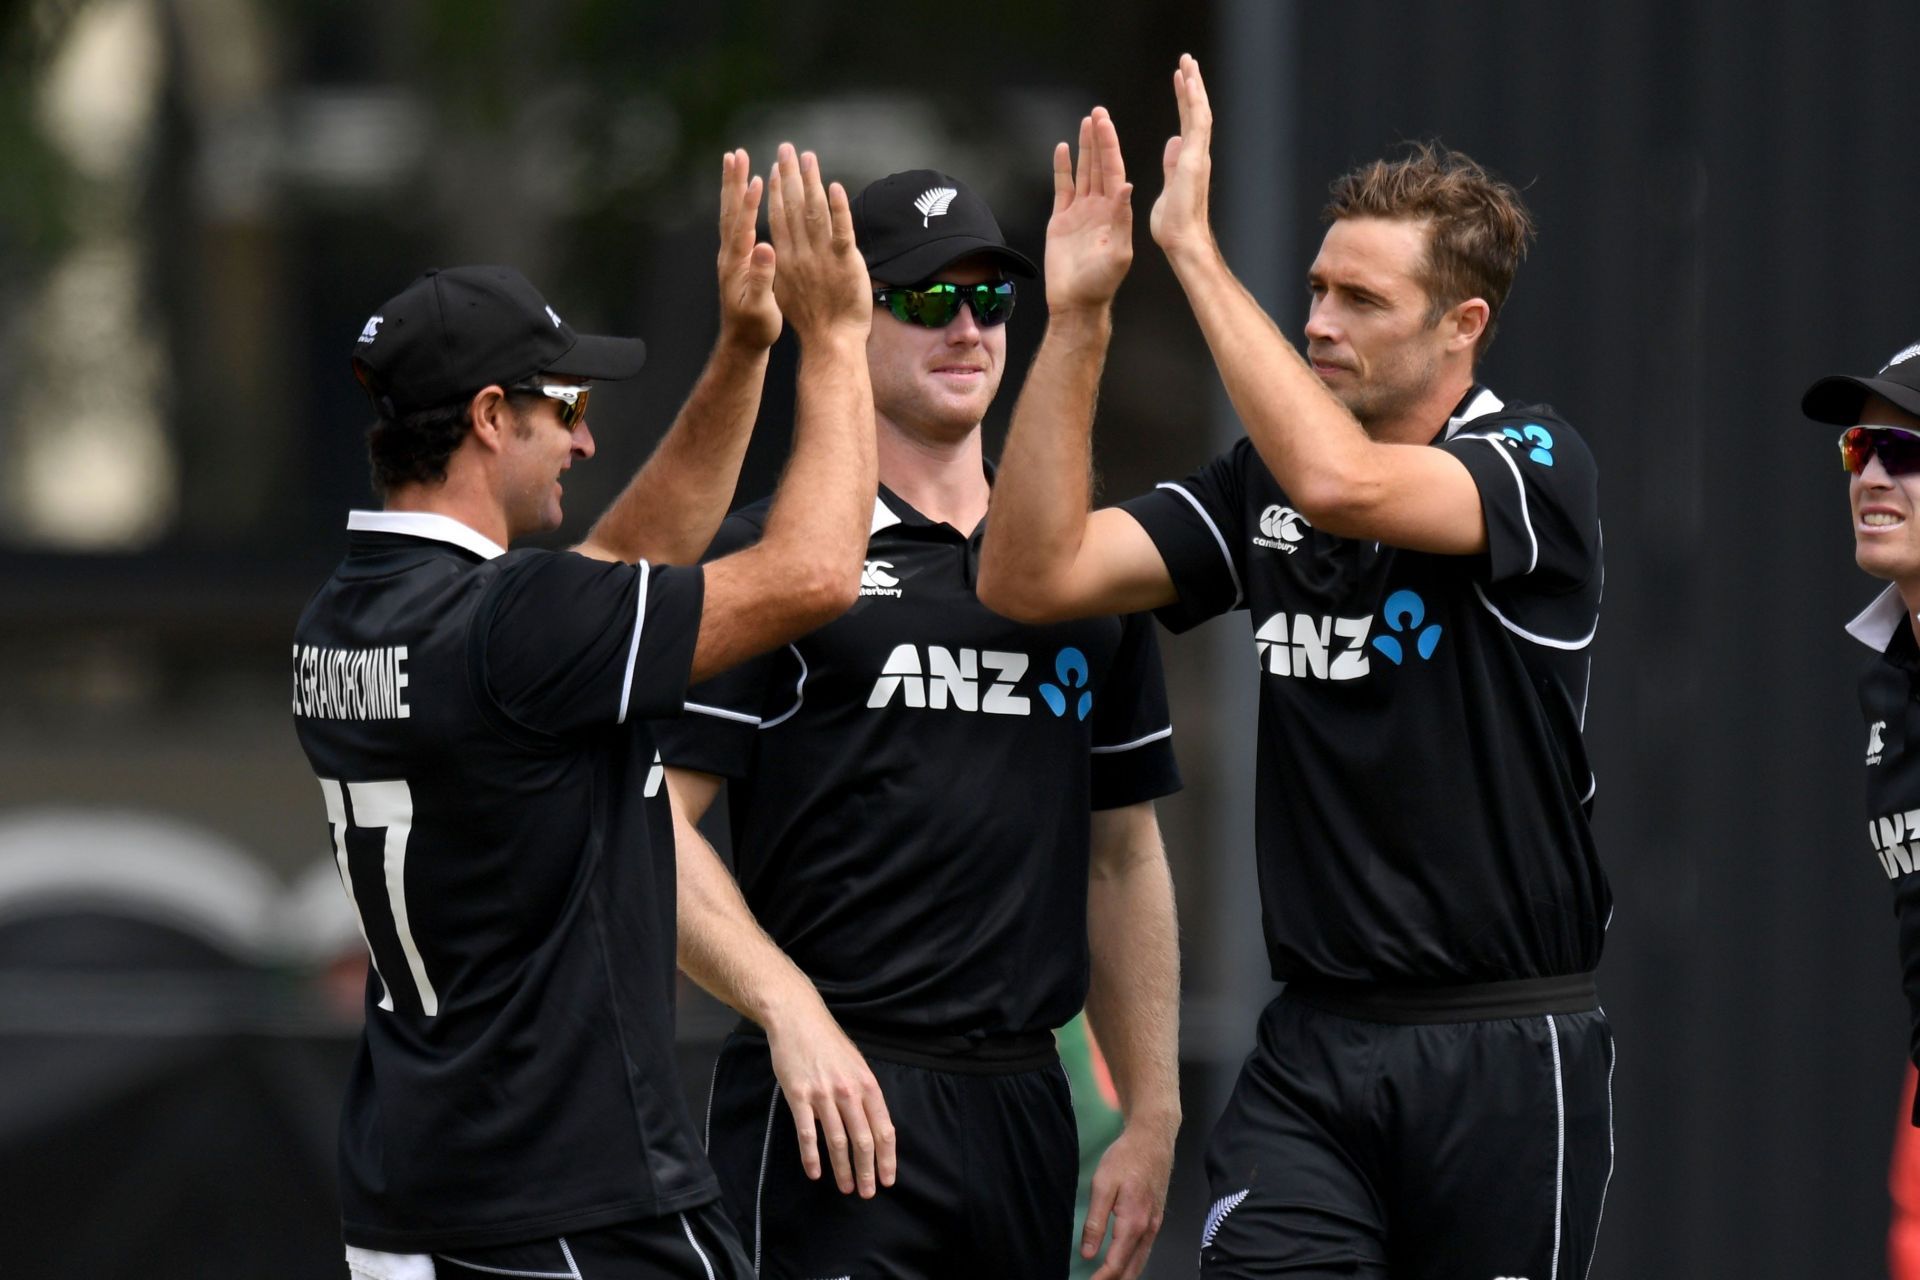 Tim Southee celebrates a wicket. (Credits: Twitter)